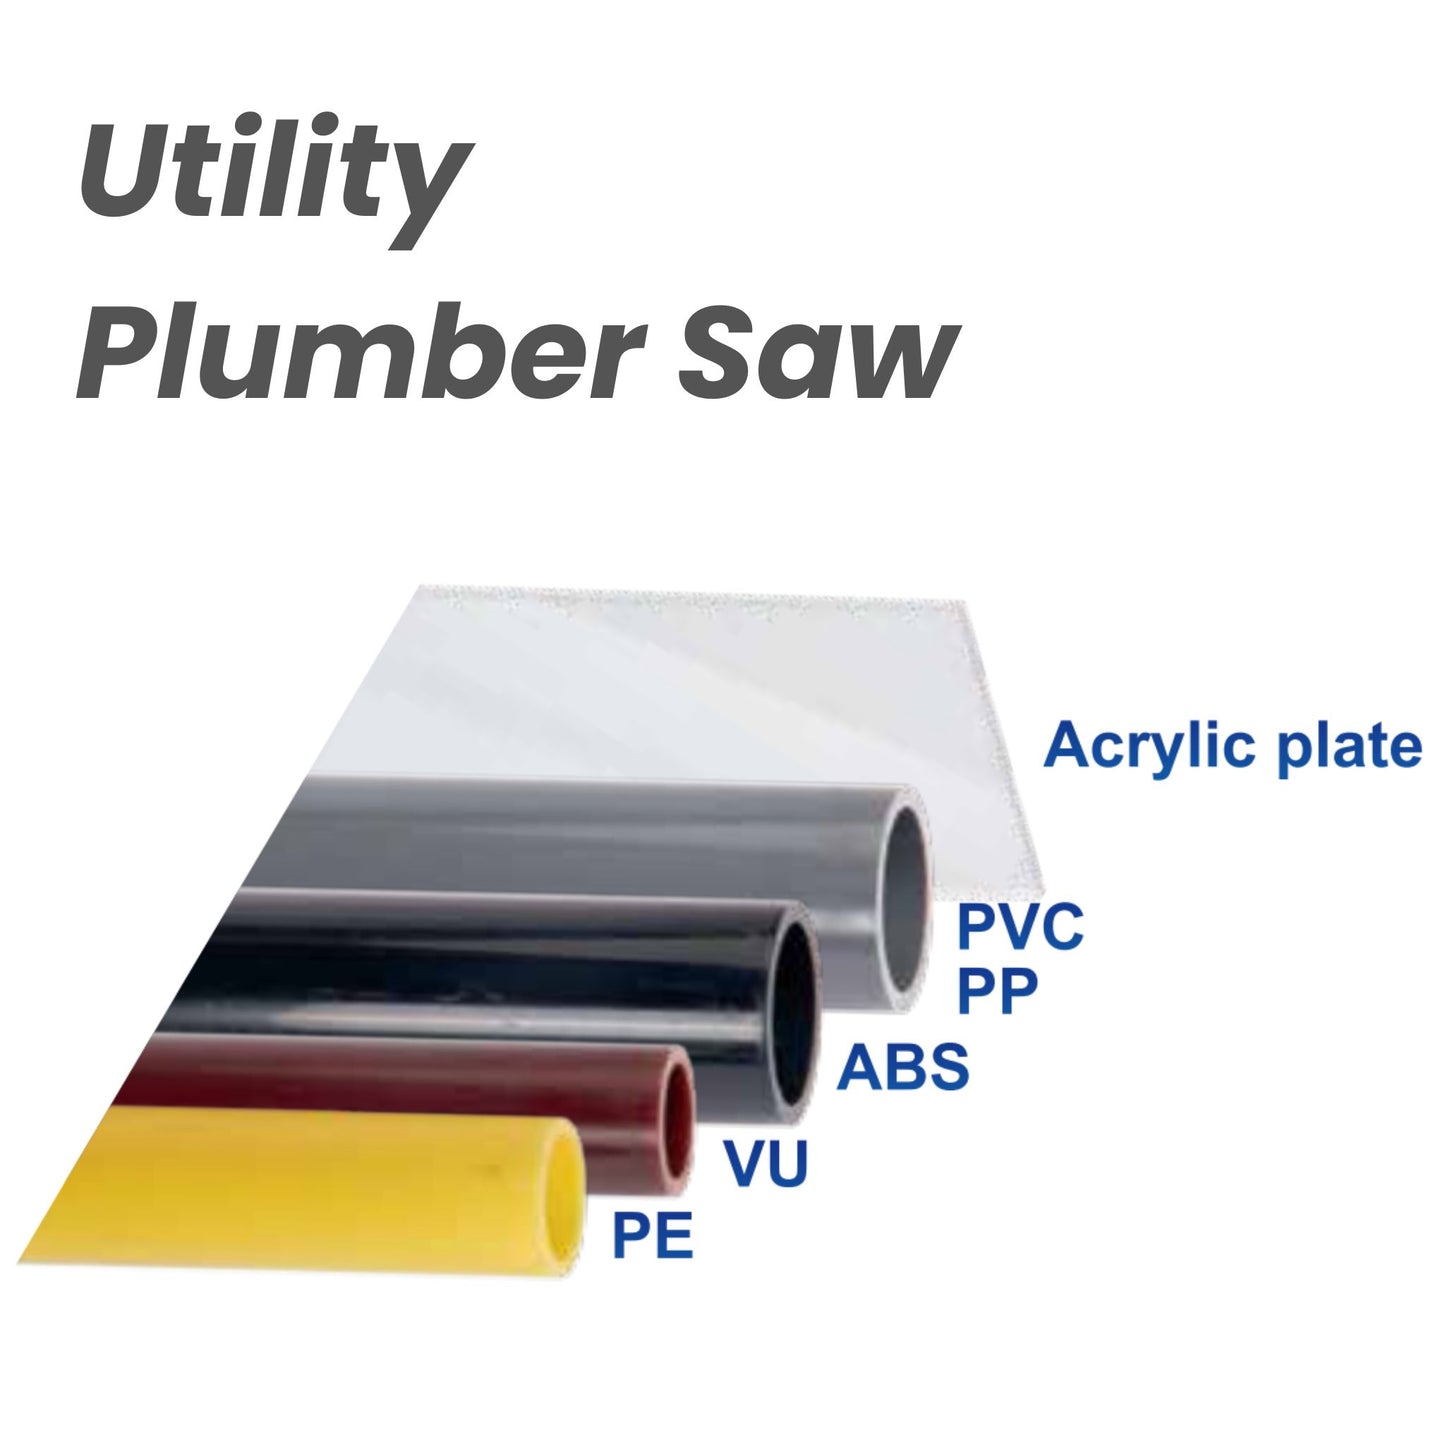 Z-saw PVC240 Pipe Saw, Japanese Pull Saw for PVC&PE Pipes Plastic and Acrylic Plates, Blade Replaceable